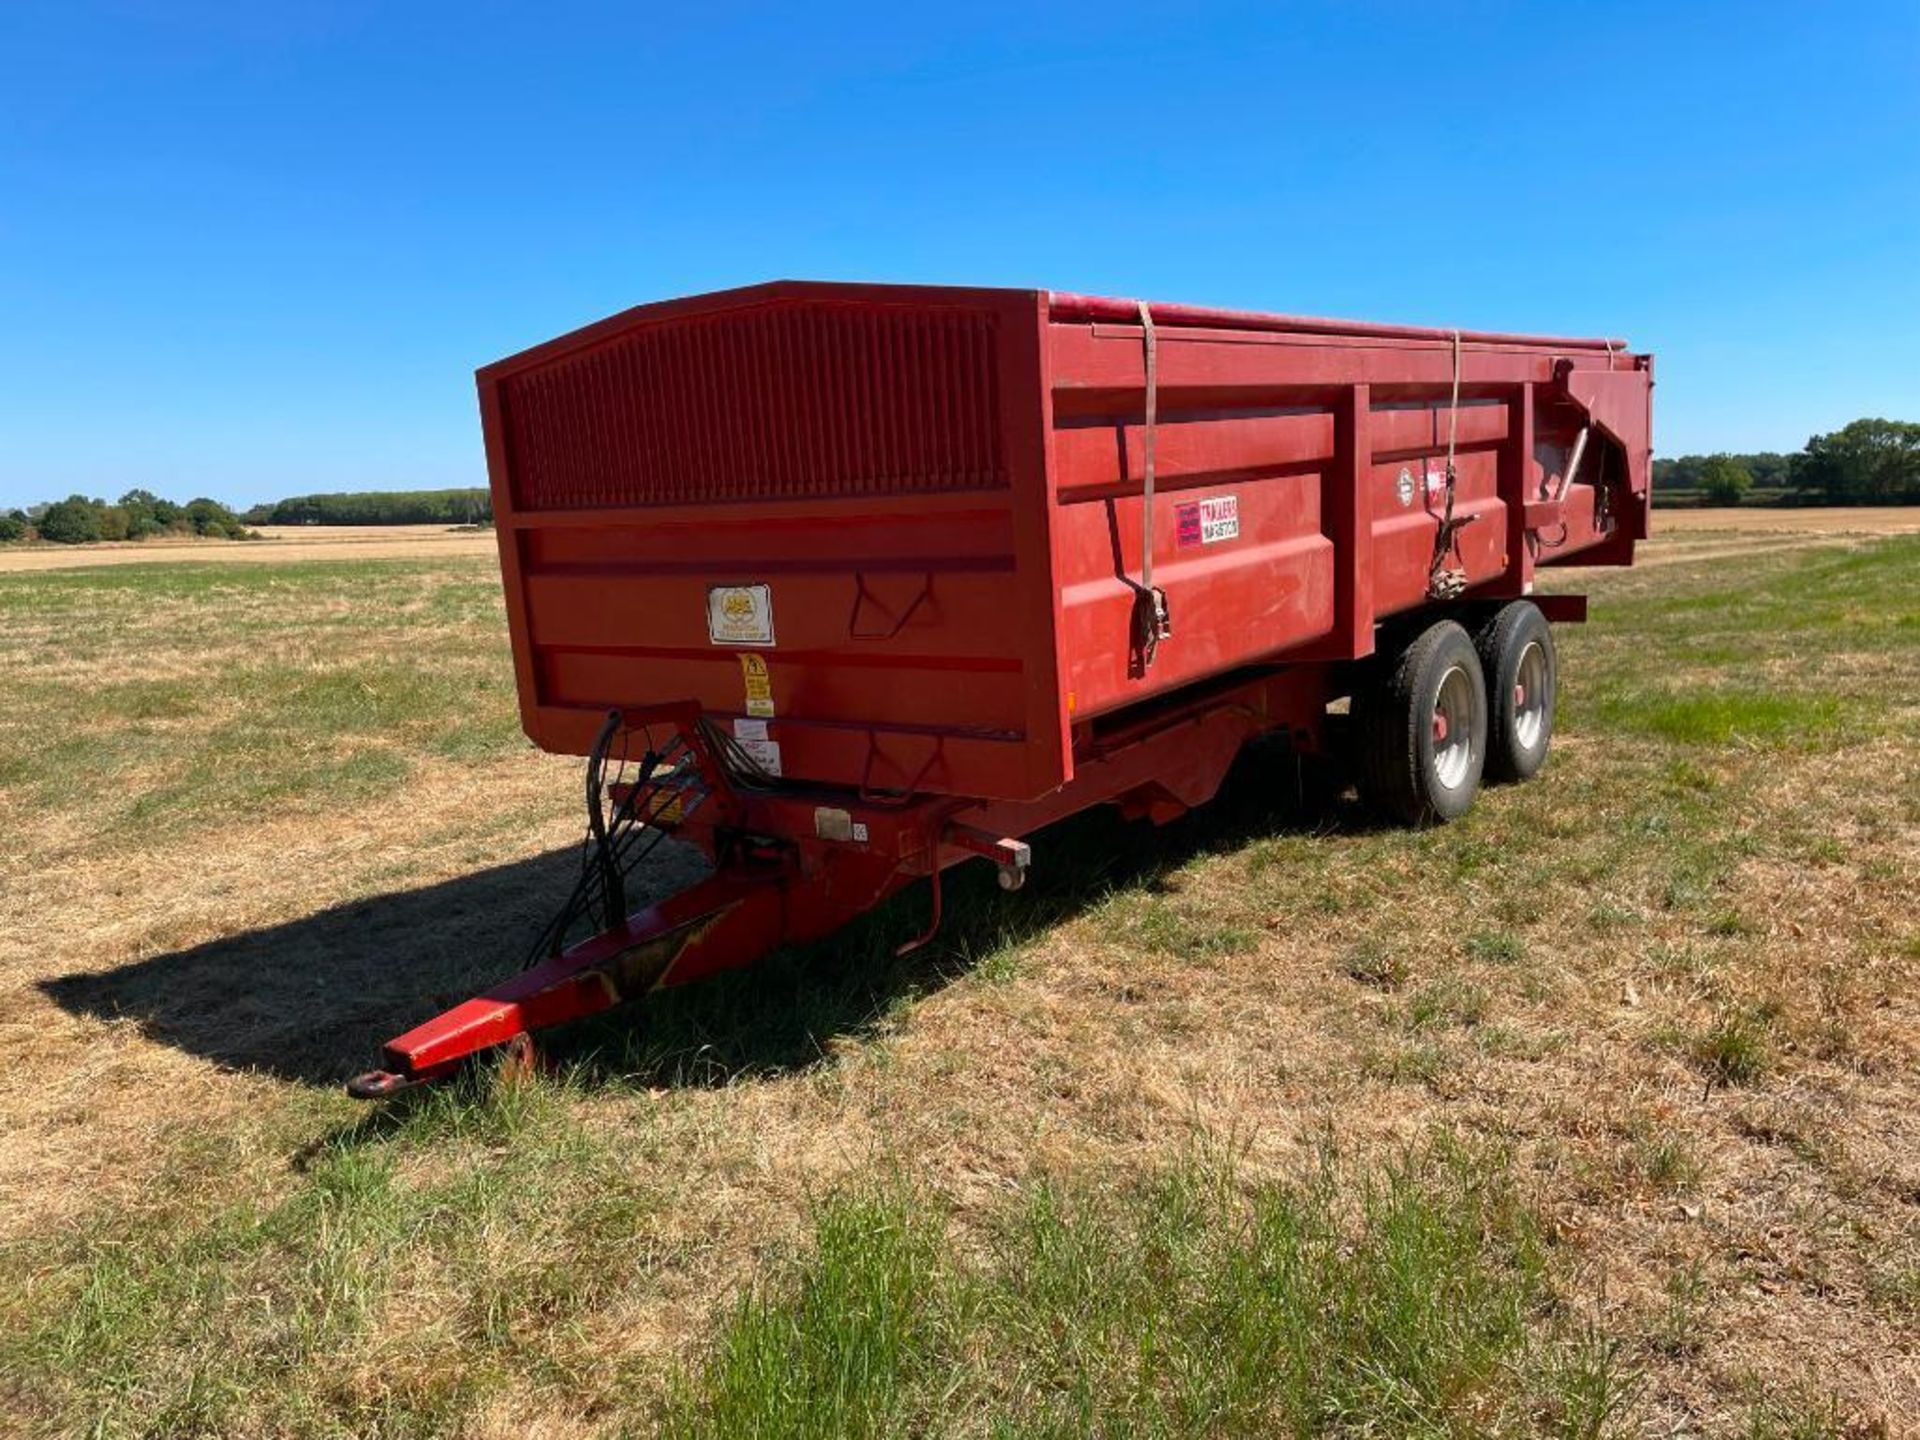 2008 AS Marston ACE Fen 14 14t grain trailer with sprung drawbar, rollover sheet, hydraulic tailgate - Image 3 of 10